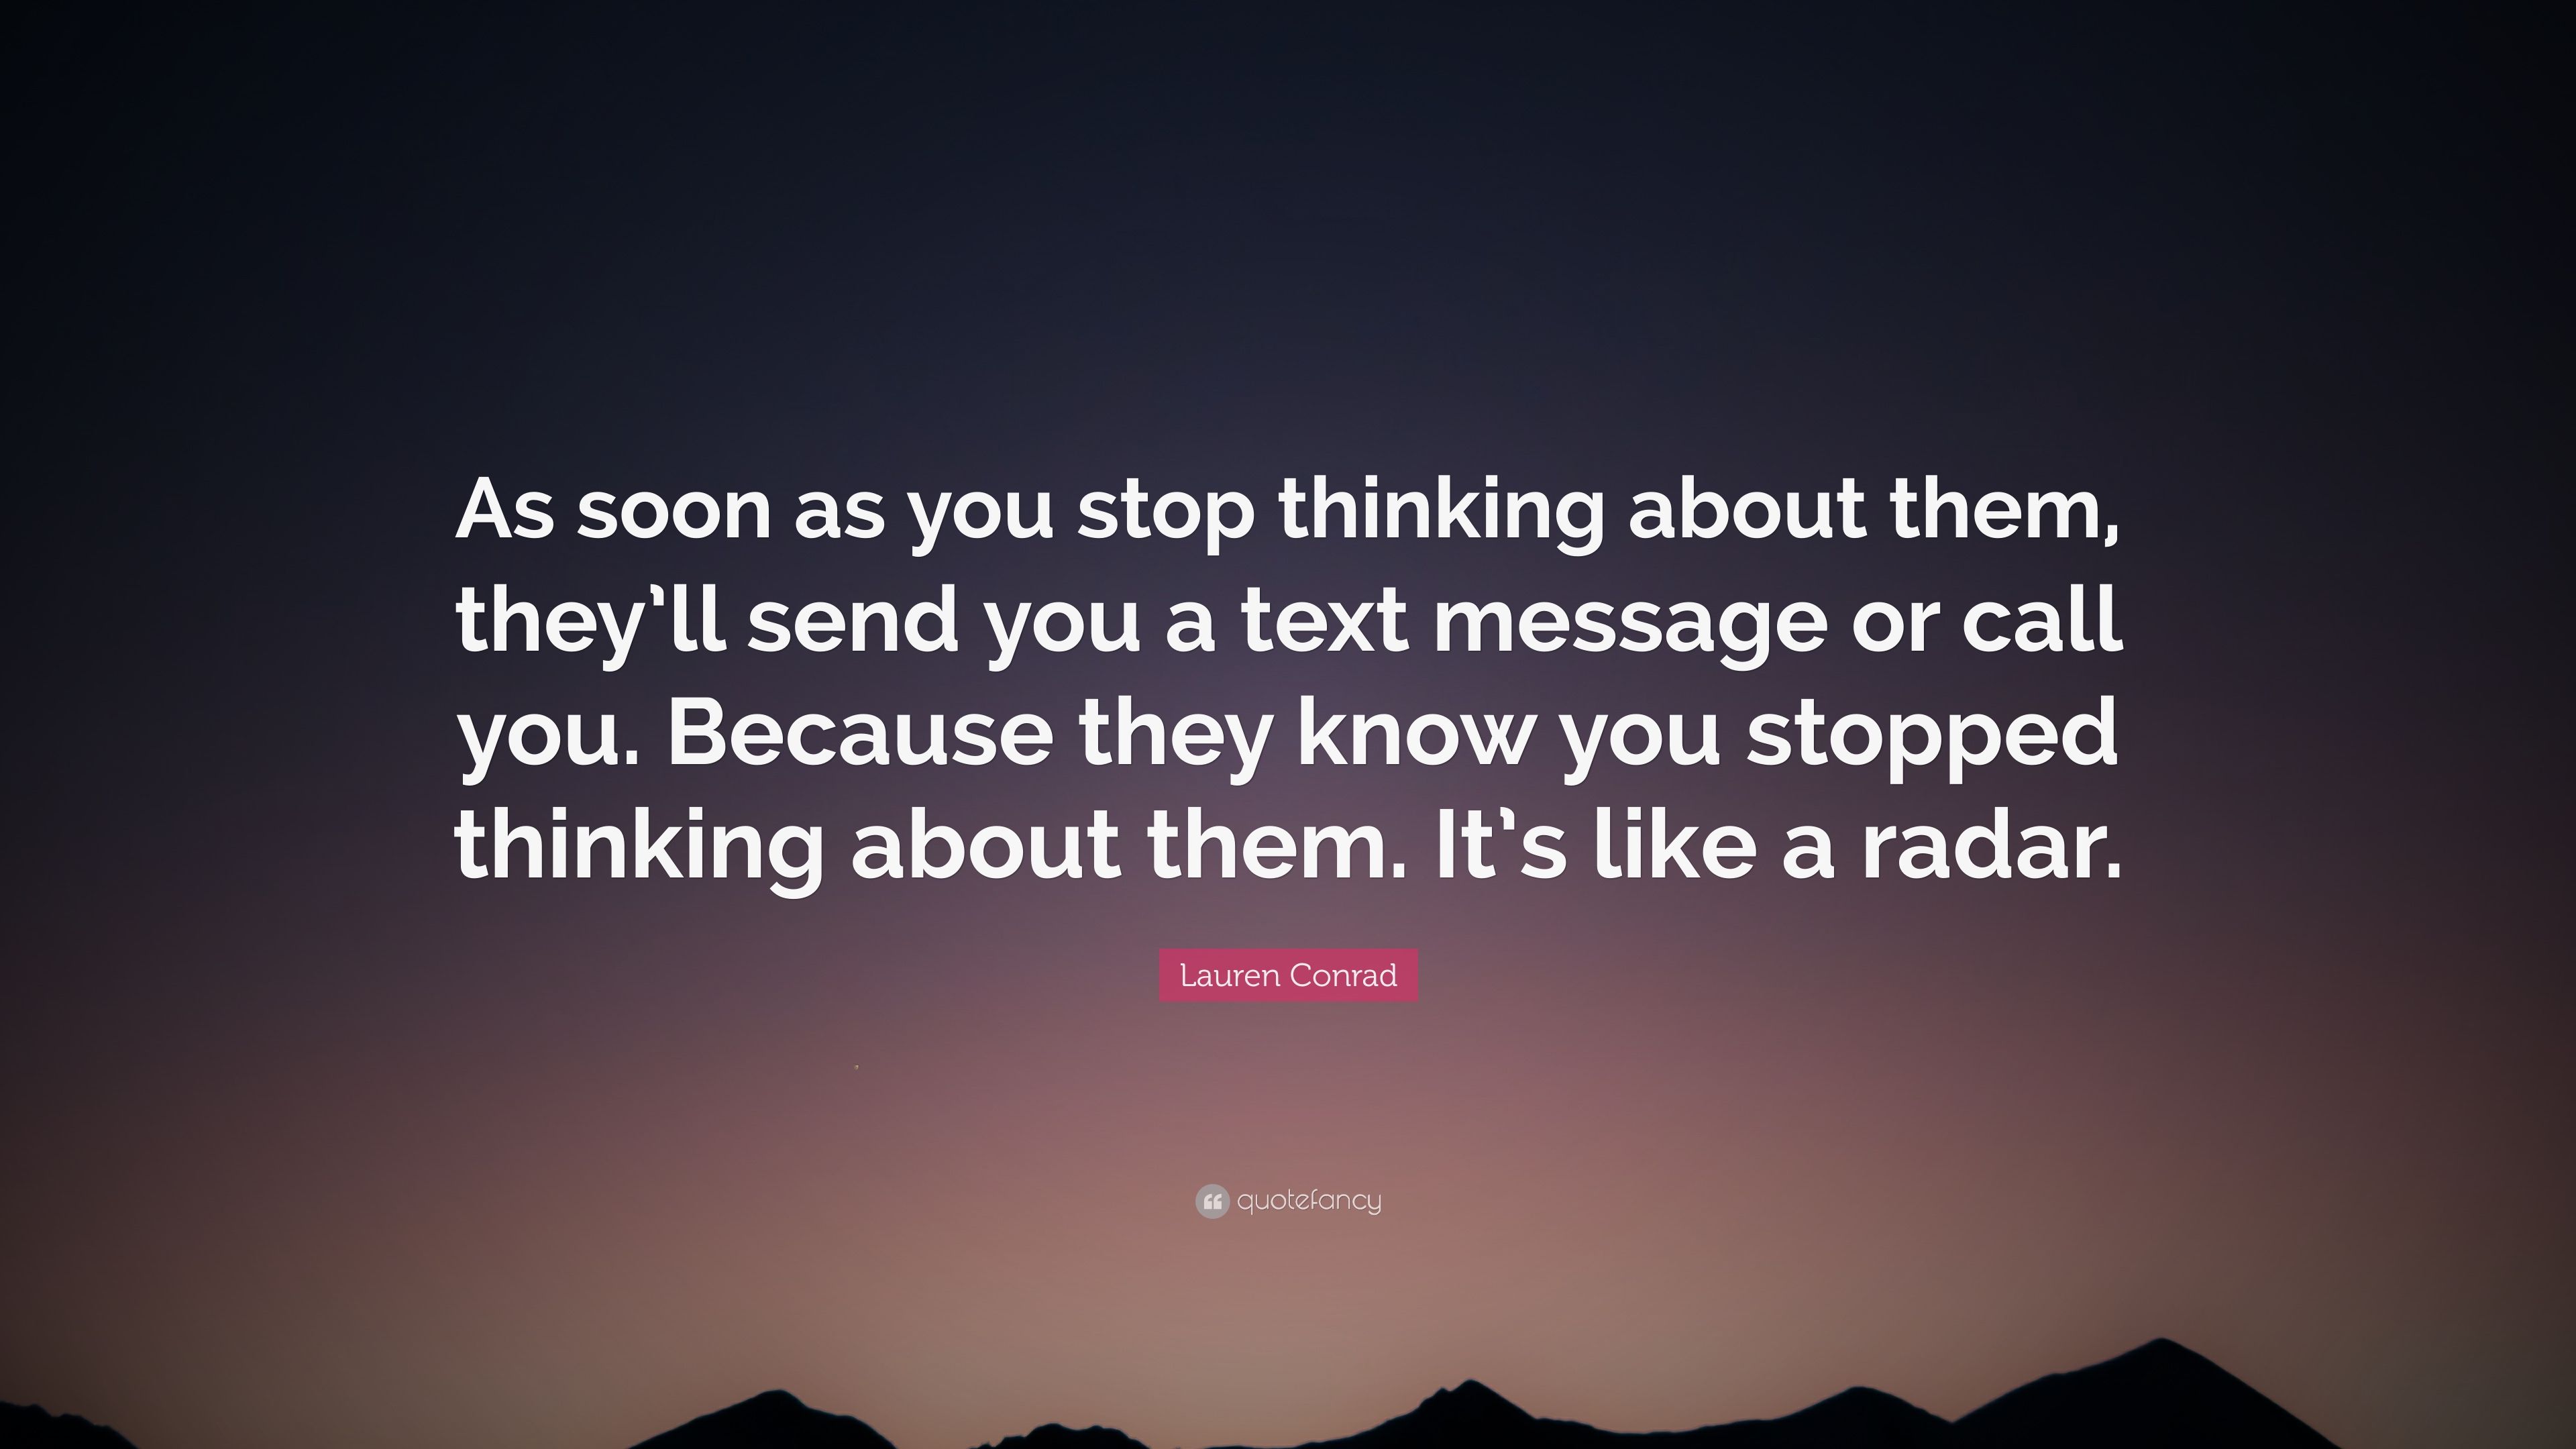 Lauren Conrad Quote: “As soon as you stop thinking about them, they'll send you a text message or call you. Because they know you stopped thin.” (7 wallpaper)